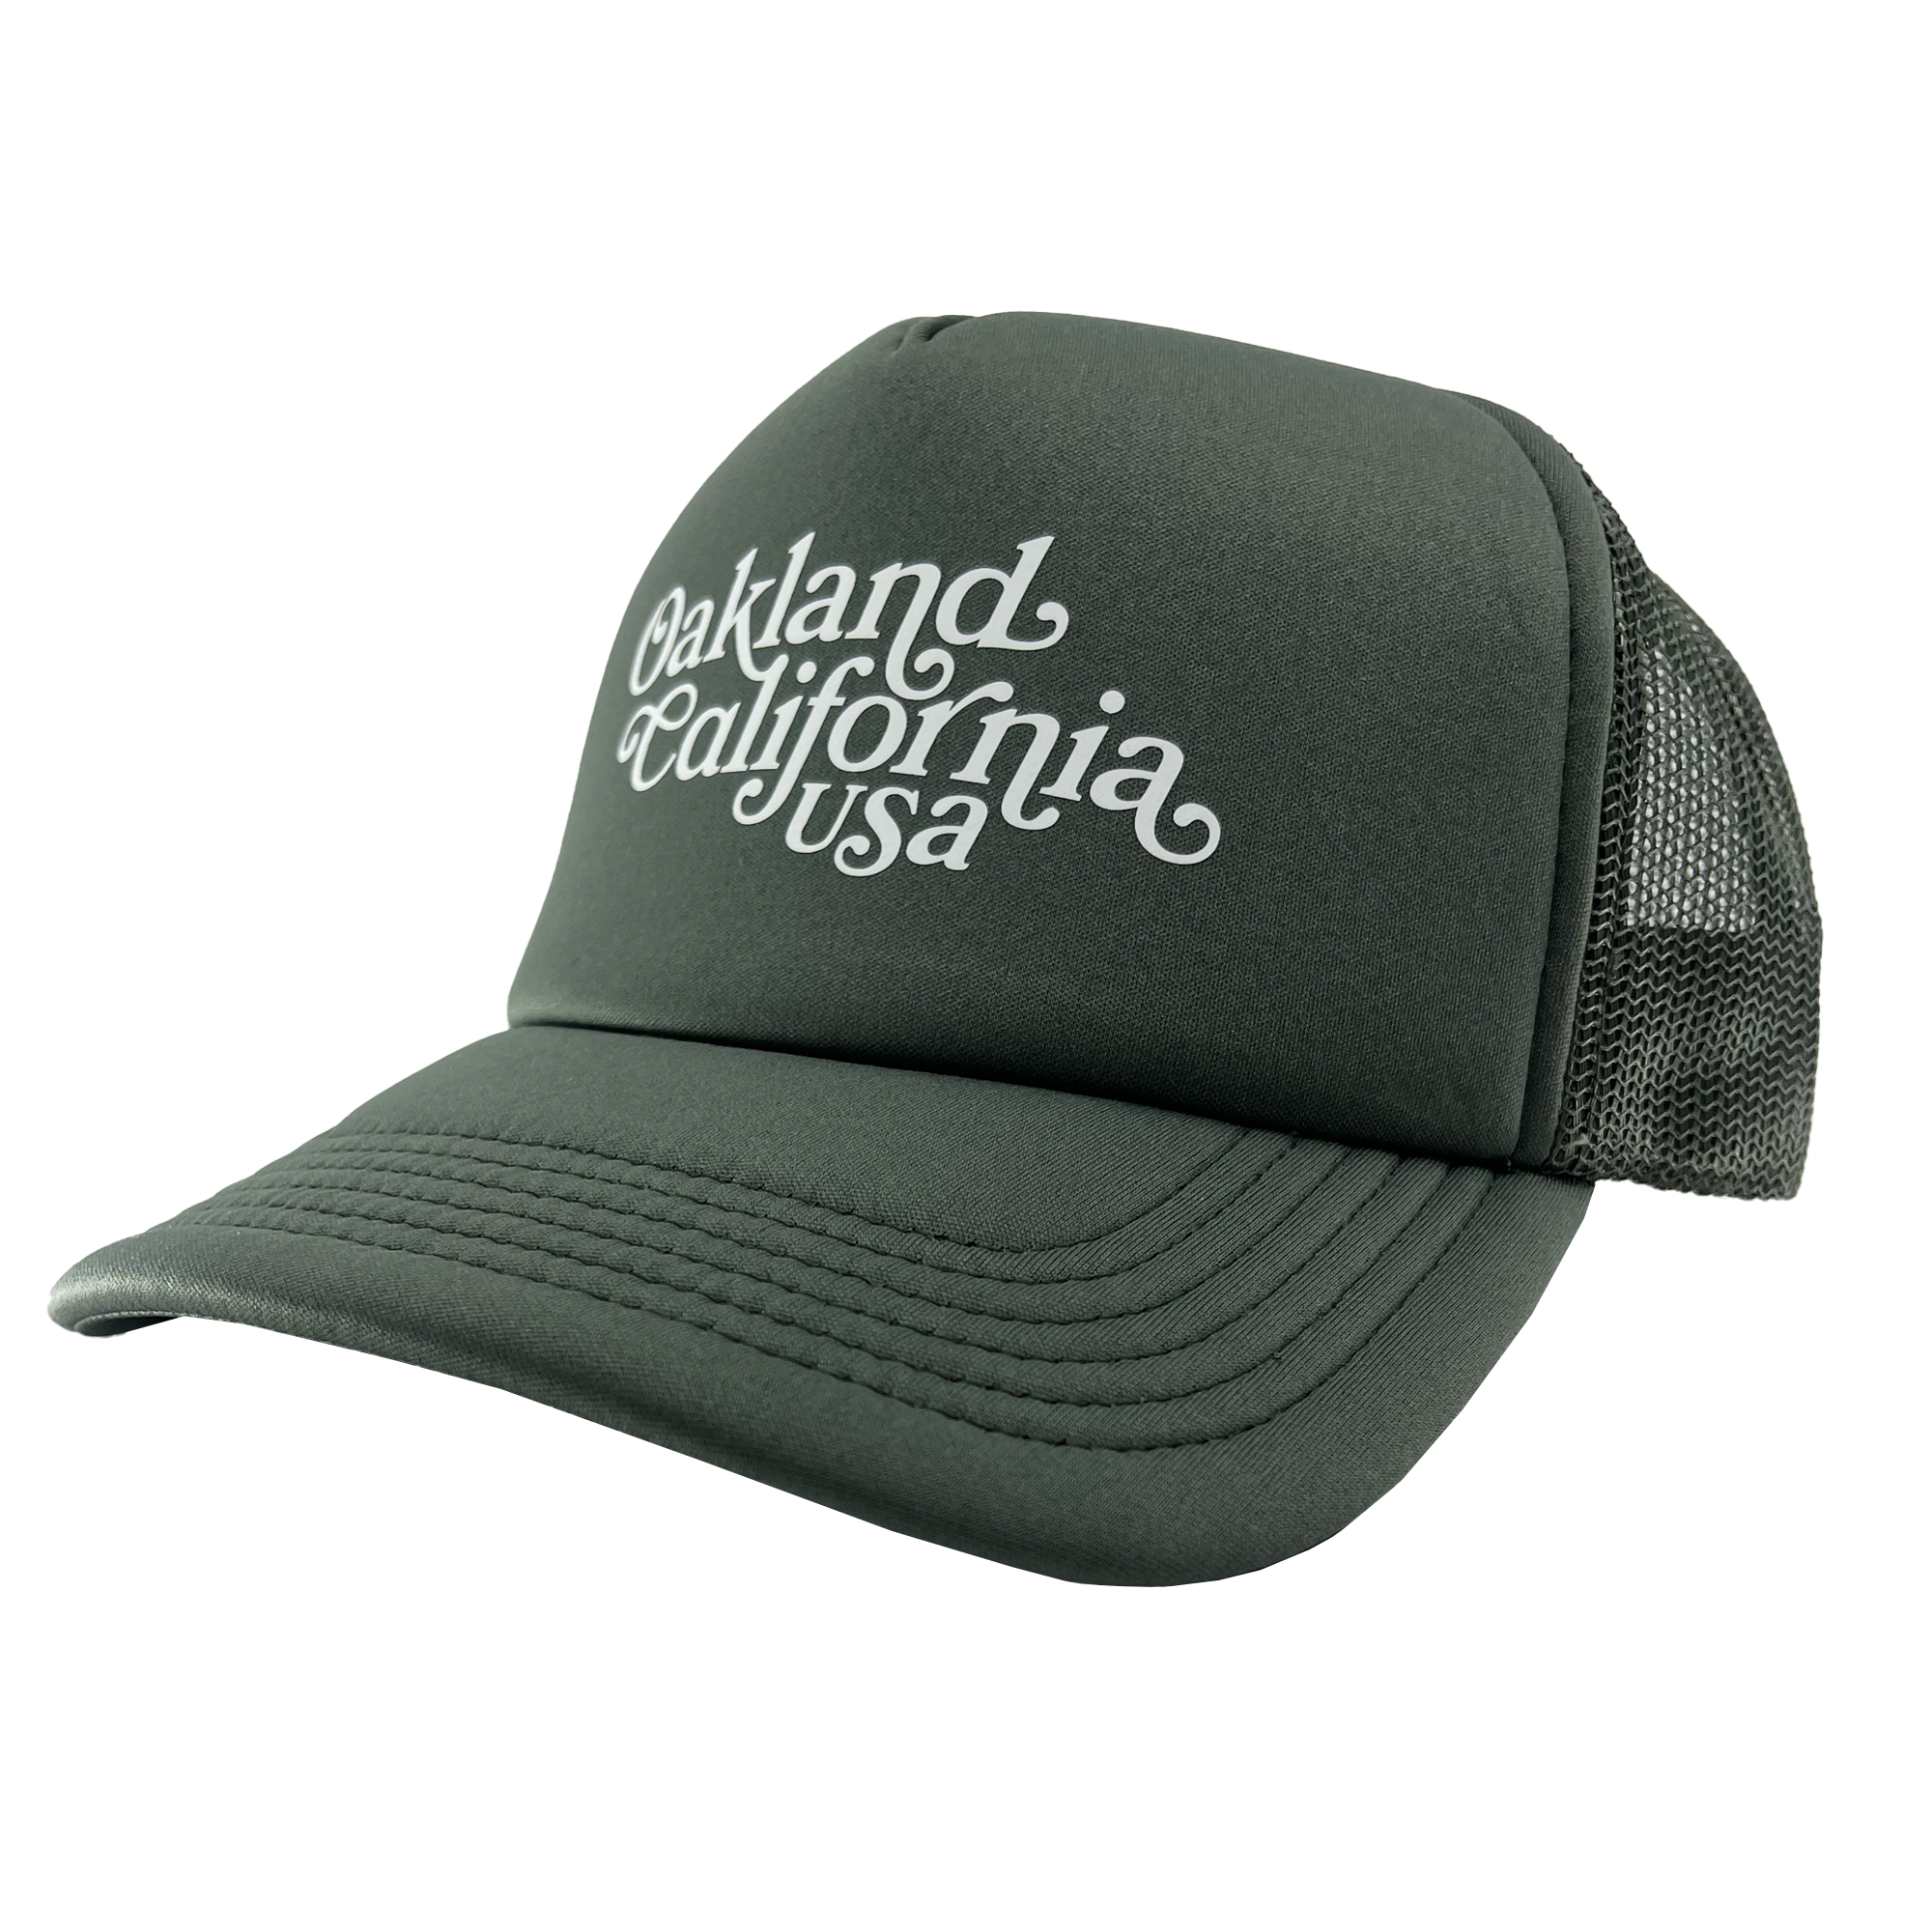 Front view of cypress green trucker cap with foam front panel, mesh back, adjustable with white Oakland, California, USA wordmark.